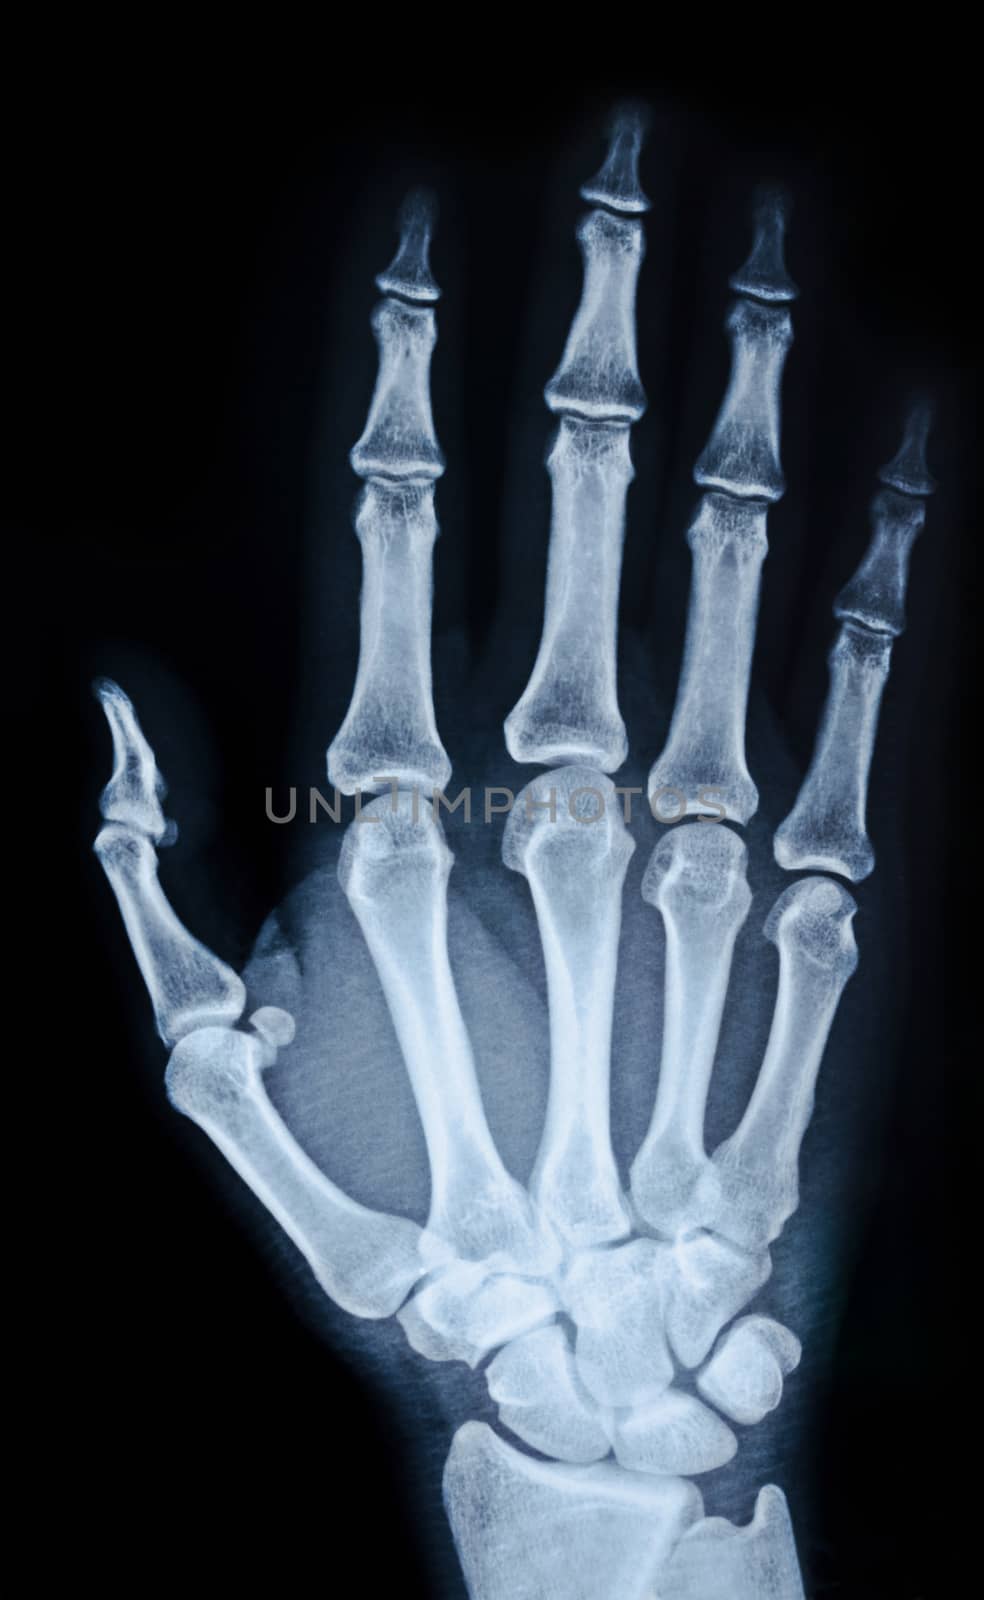 X-ray image of the hand on black background.